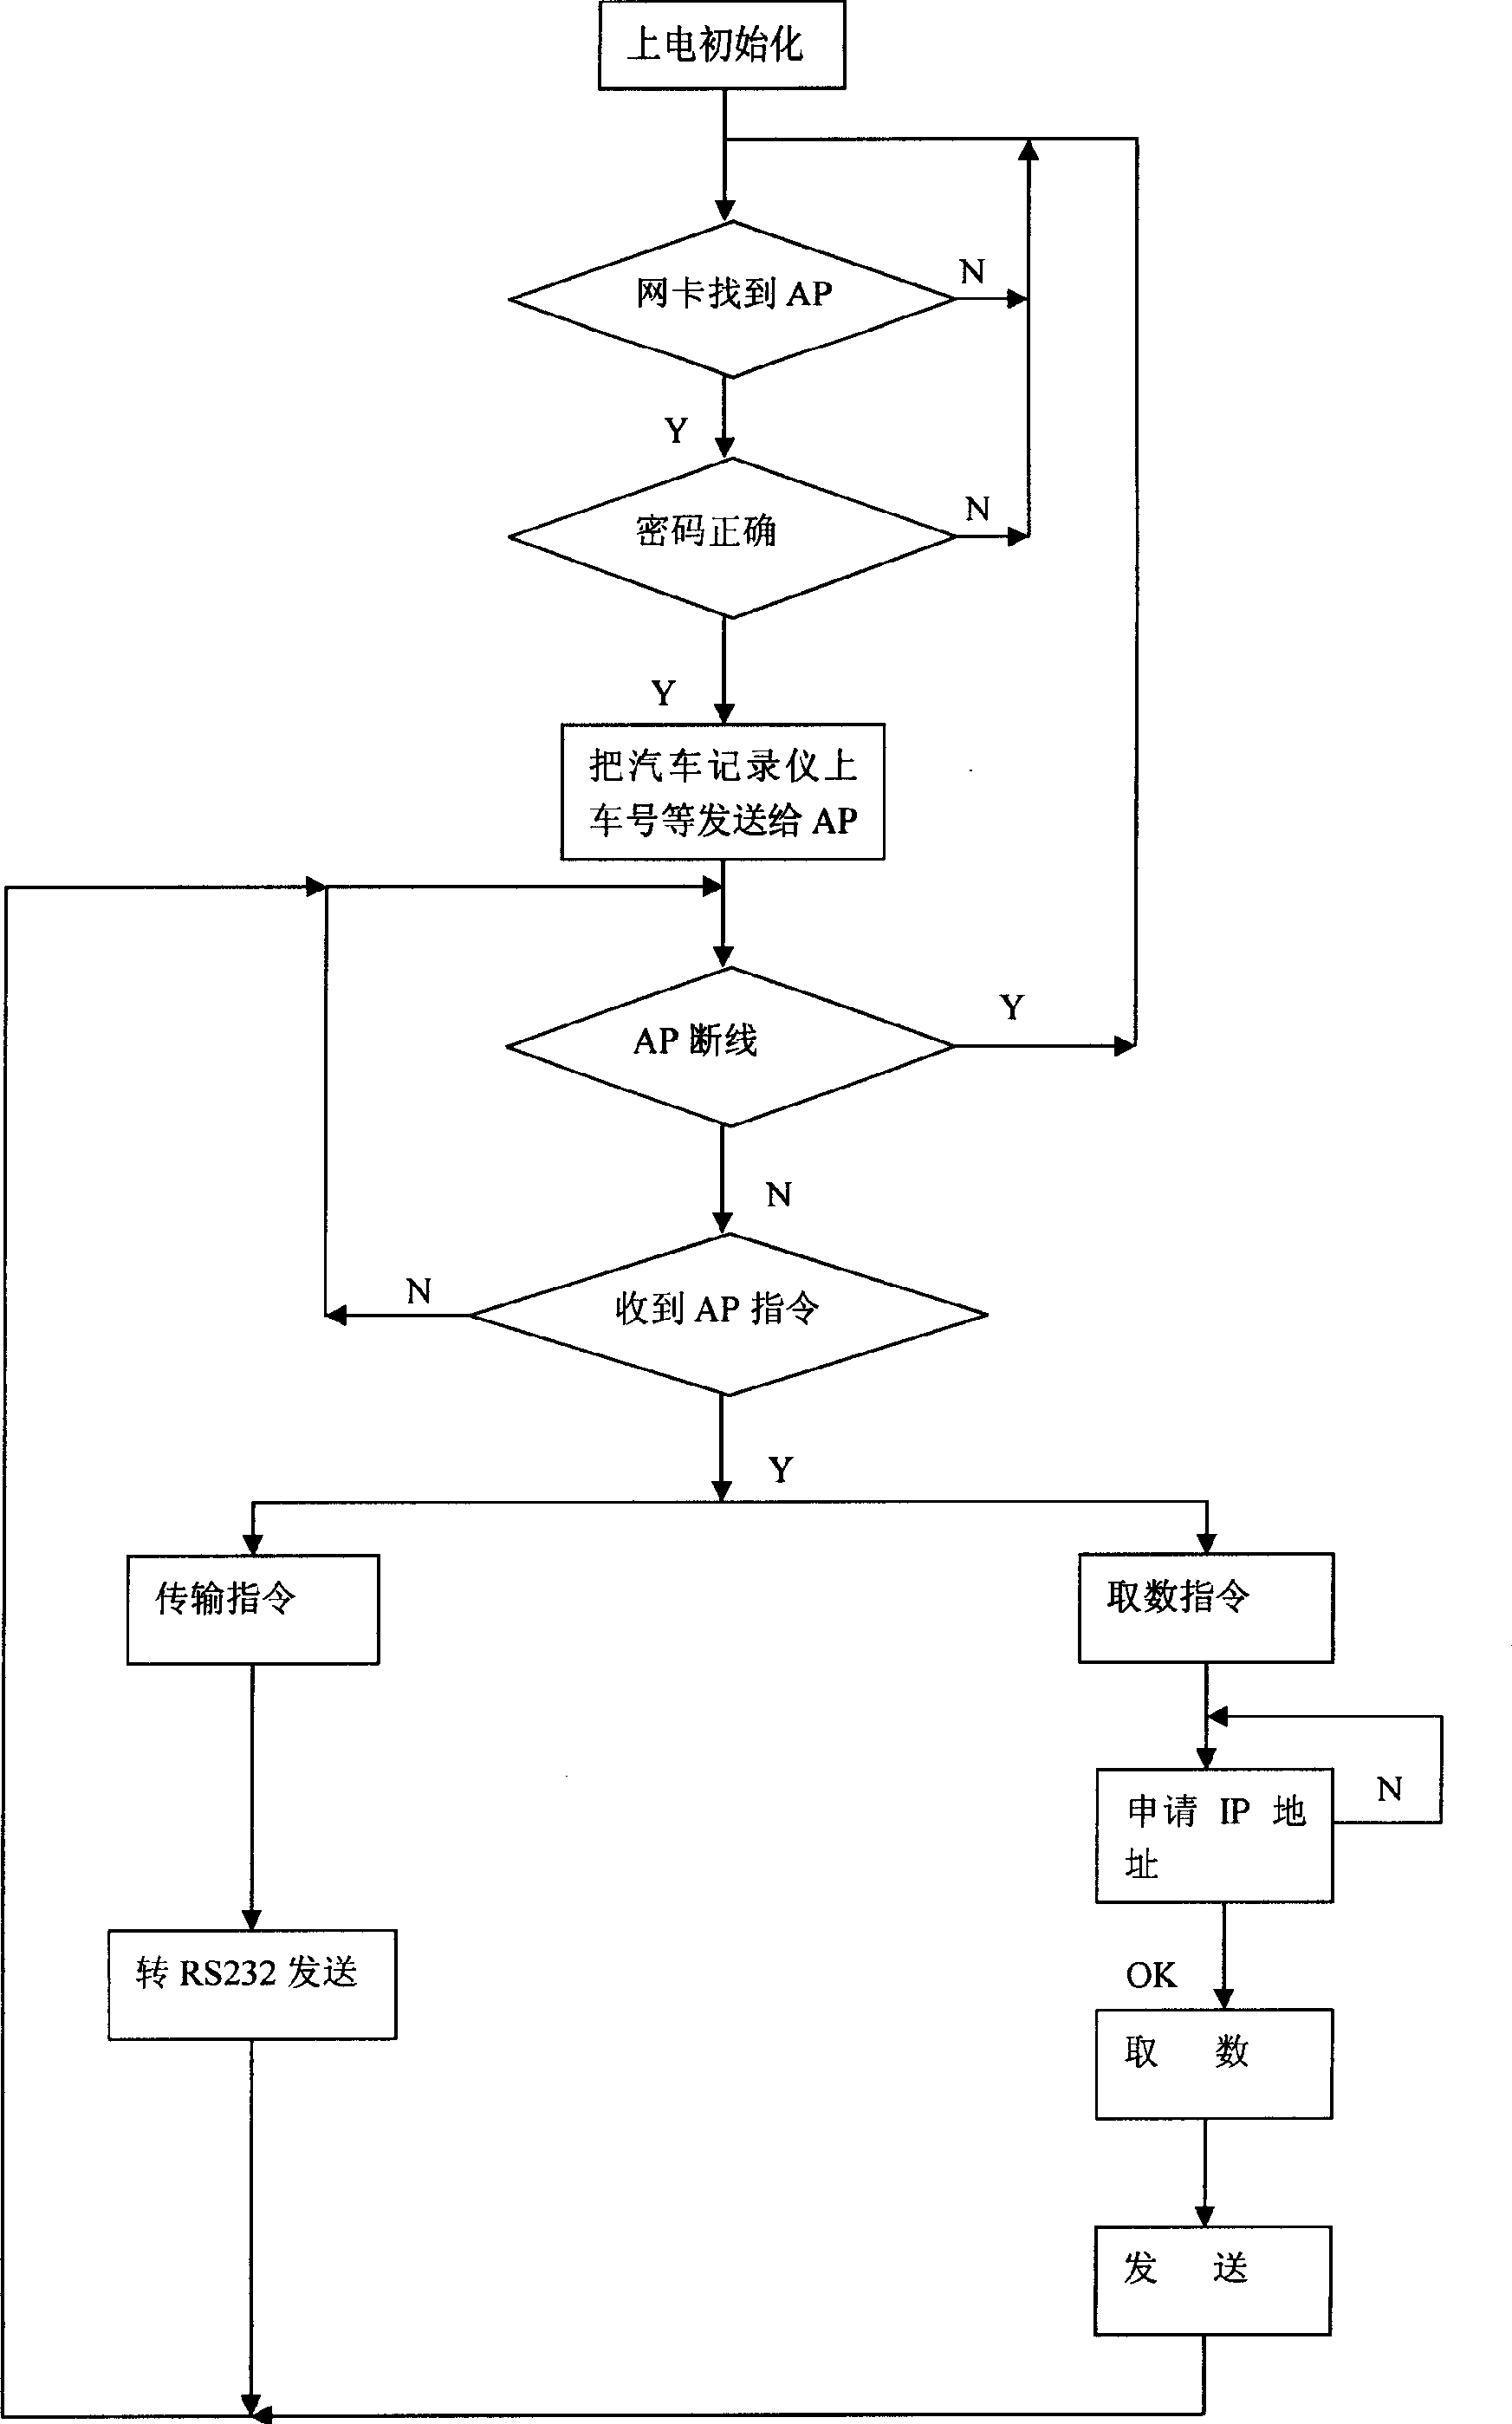 Automobile travel recorder using radio local network transmitting data and its data collecting and transmitting method